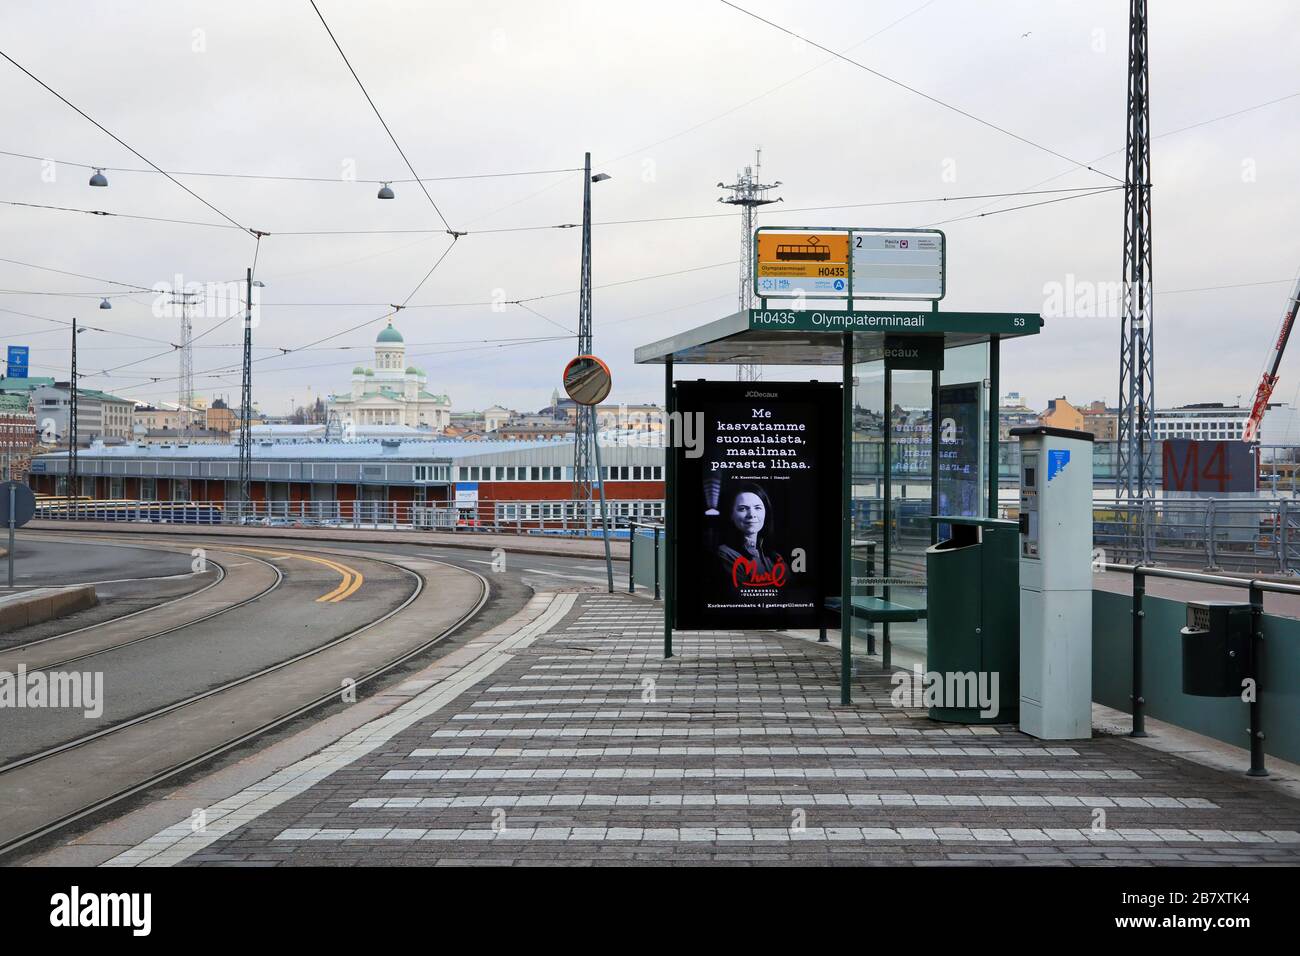 Helsinki, Finland. March 18, 2020. Empty tram stop and deserted street during Coronavirus pandemic by South Harbour, Helsinki. Stock Photo